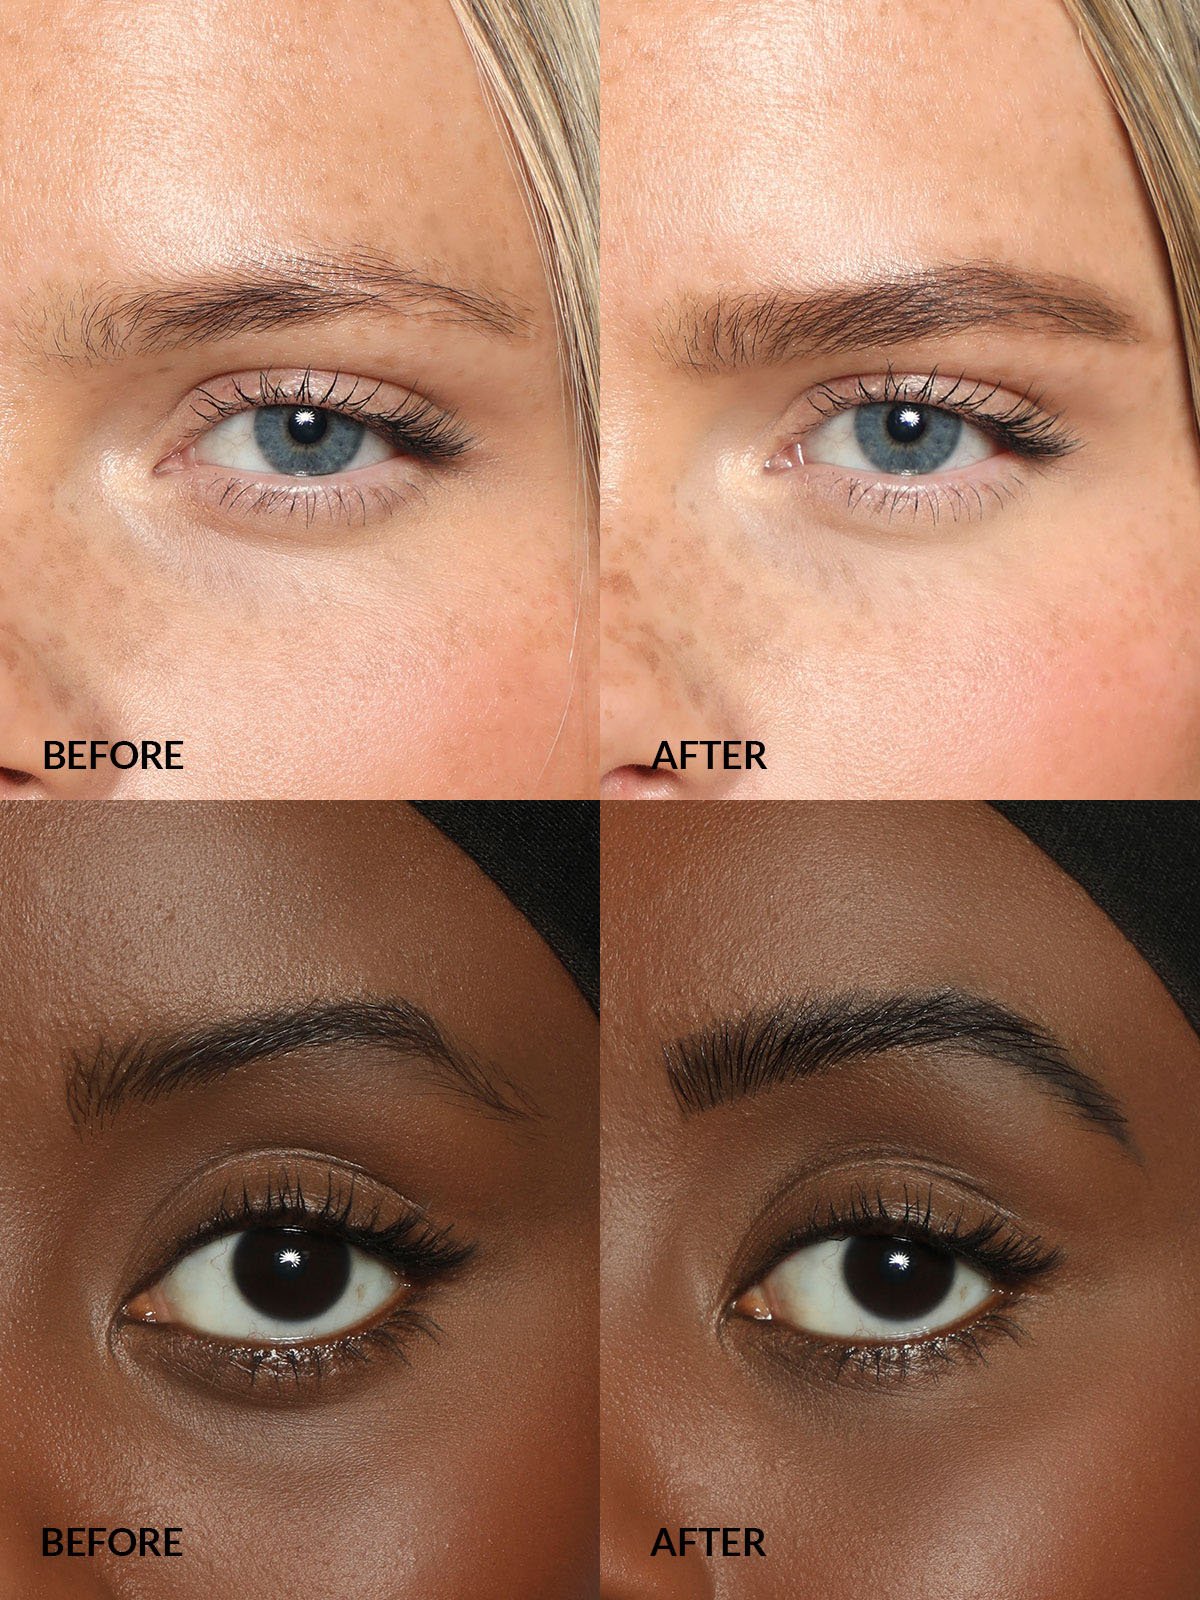 REFY Brow Tint + Brow Pencil Before + After on Models